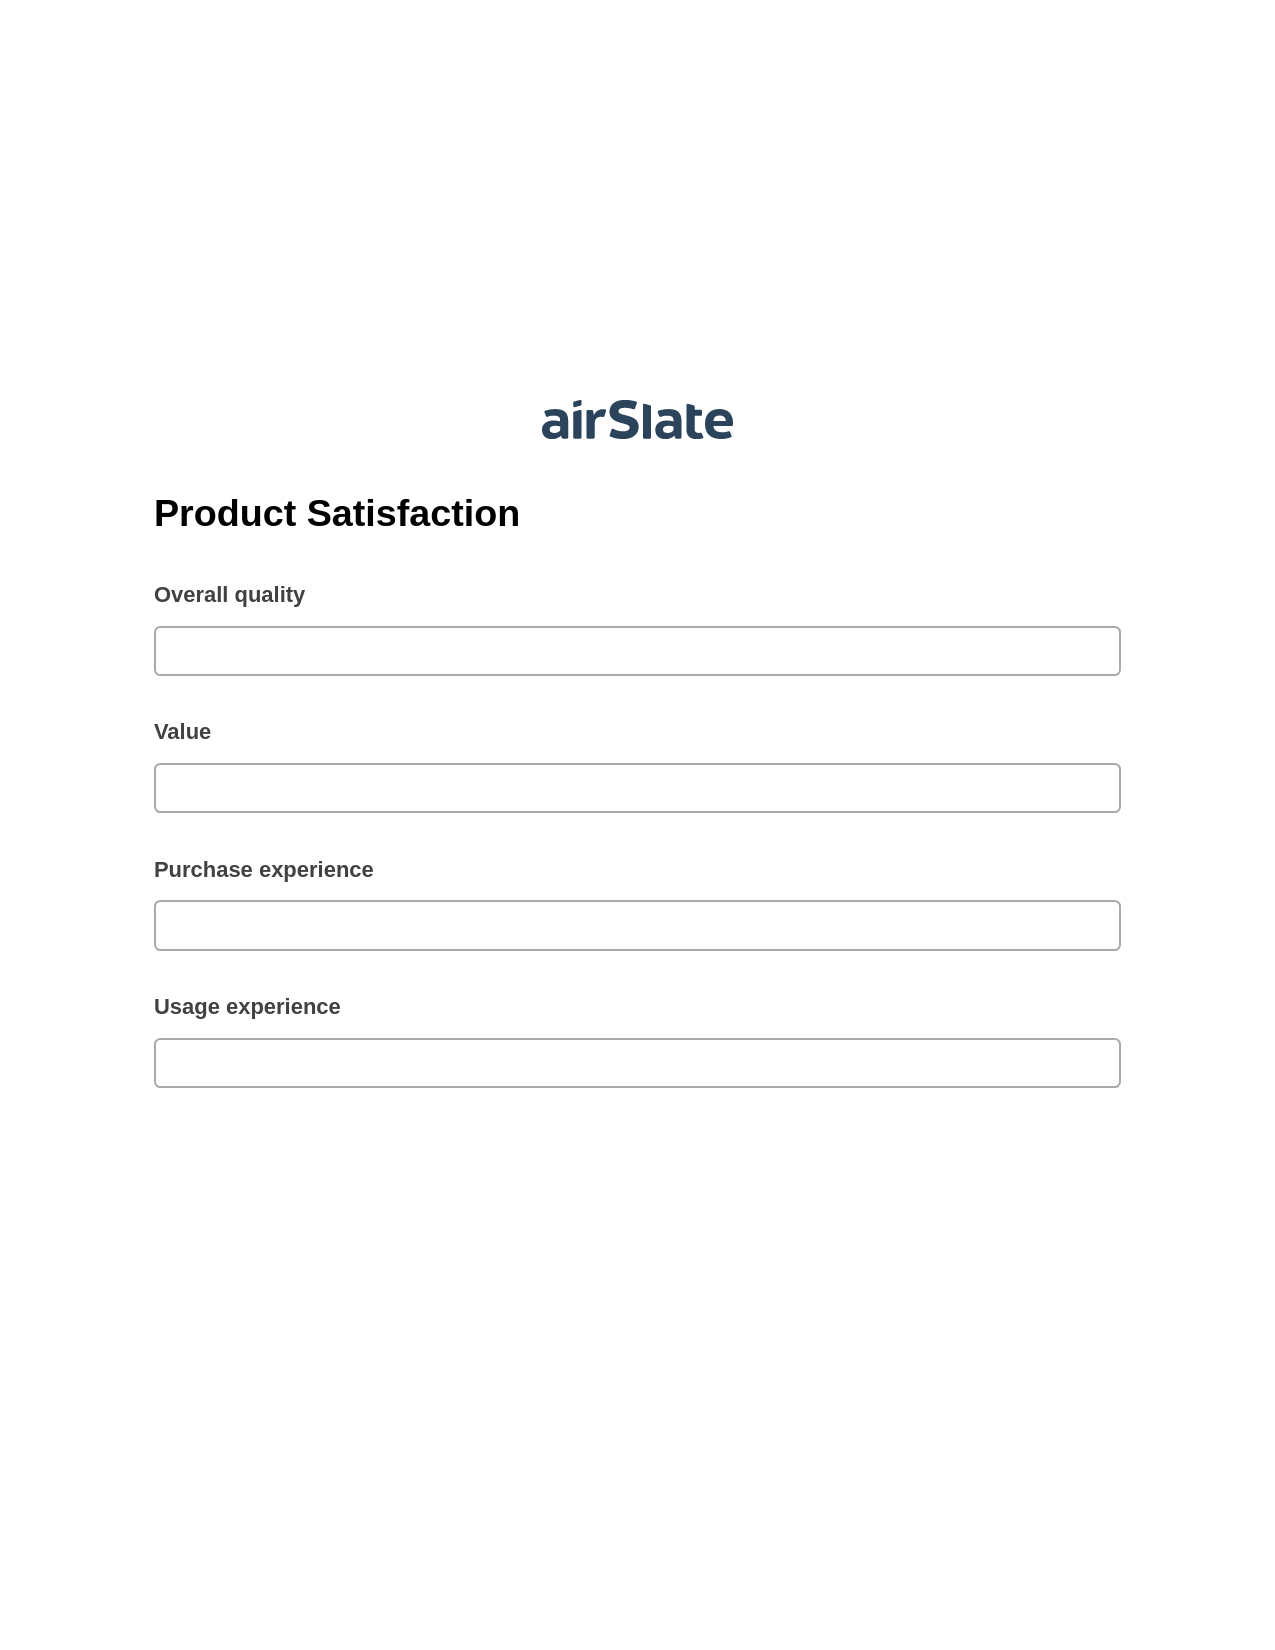 Product Satisfaction Pre-fill from Google Sheets Bot, Update Salesforce Record Bot, Export to Excel 365 Bot